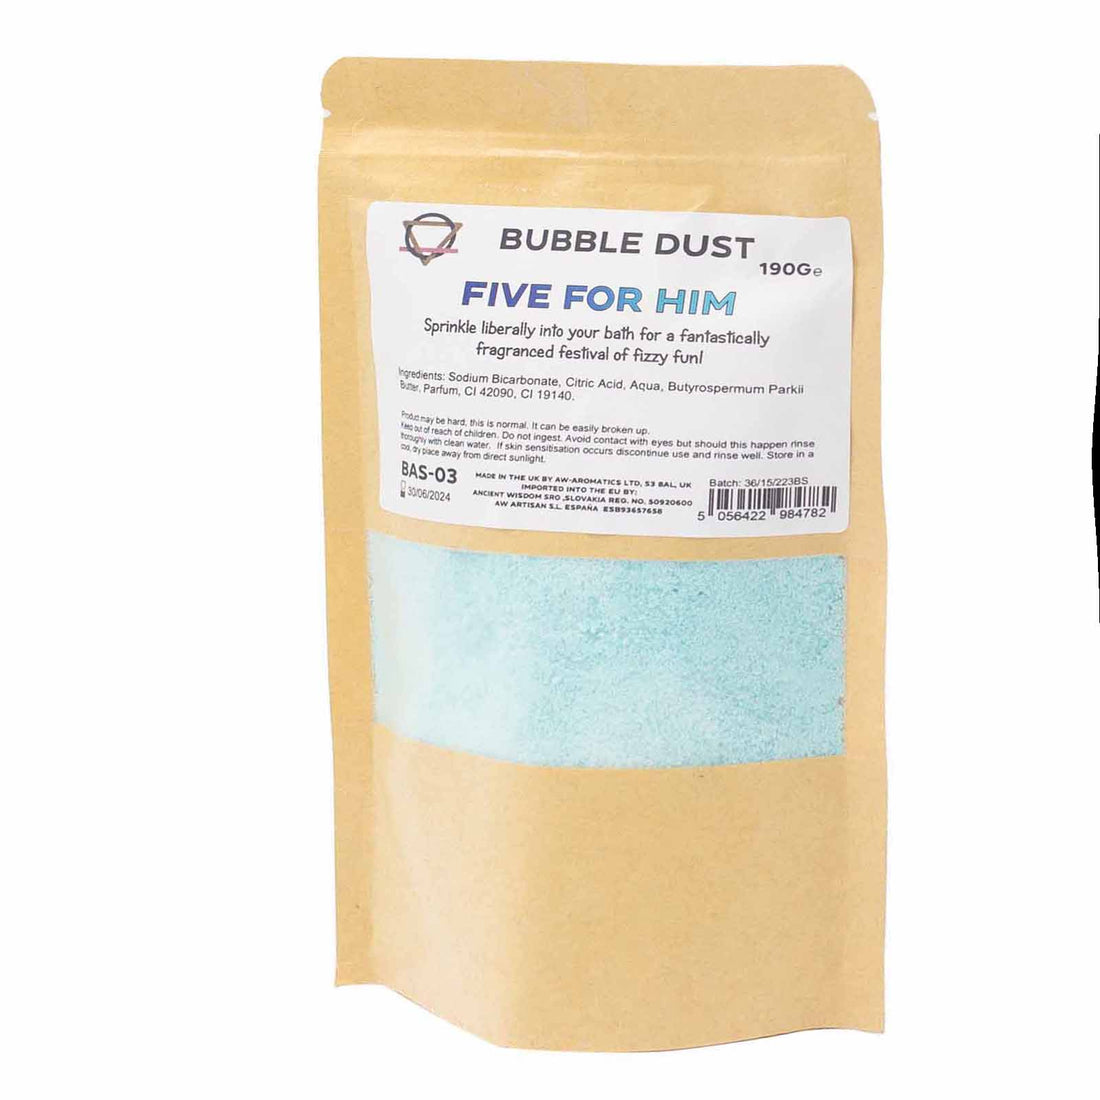 Five for Him Bath Dust